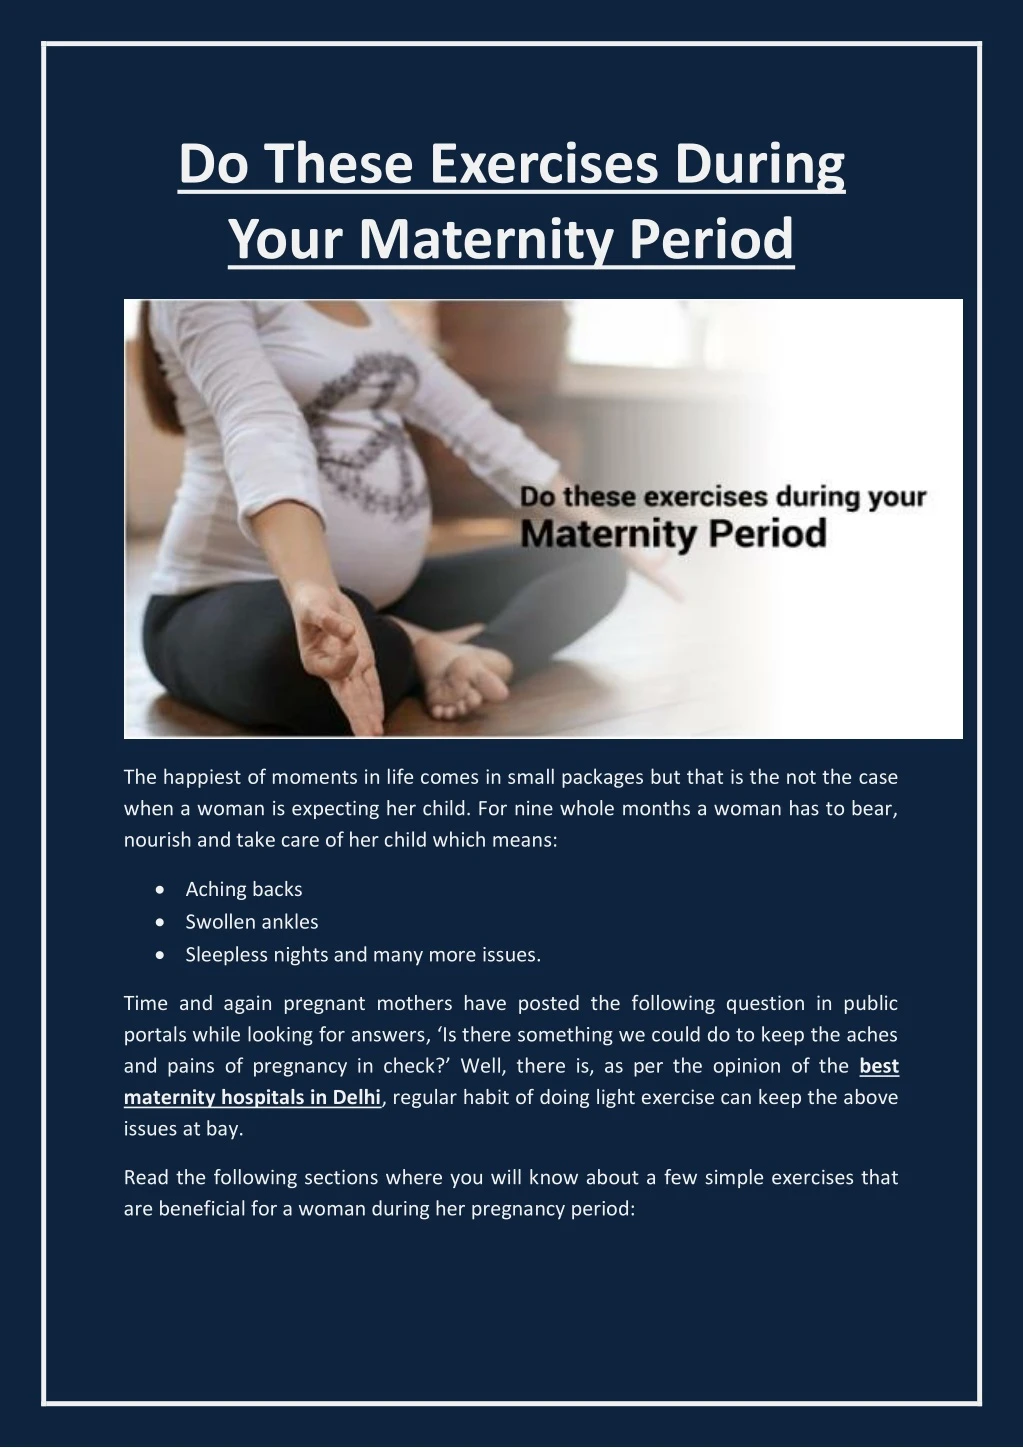 do these exercises during your maternity period